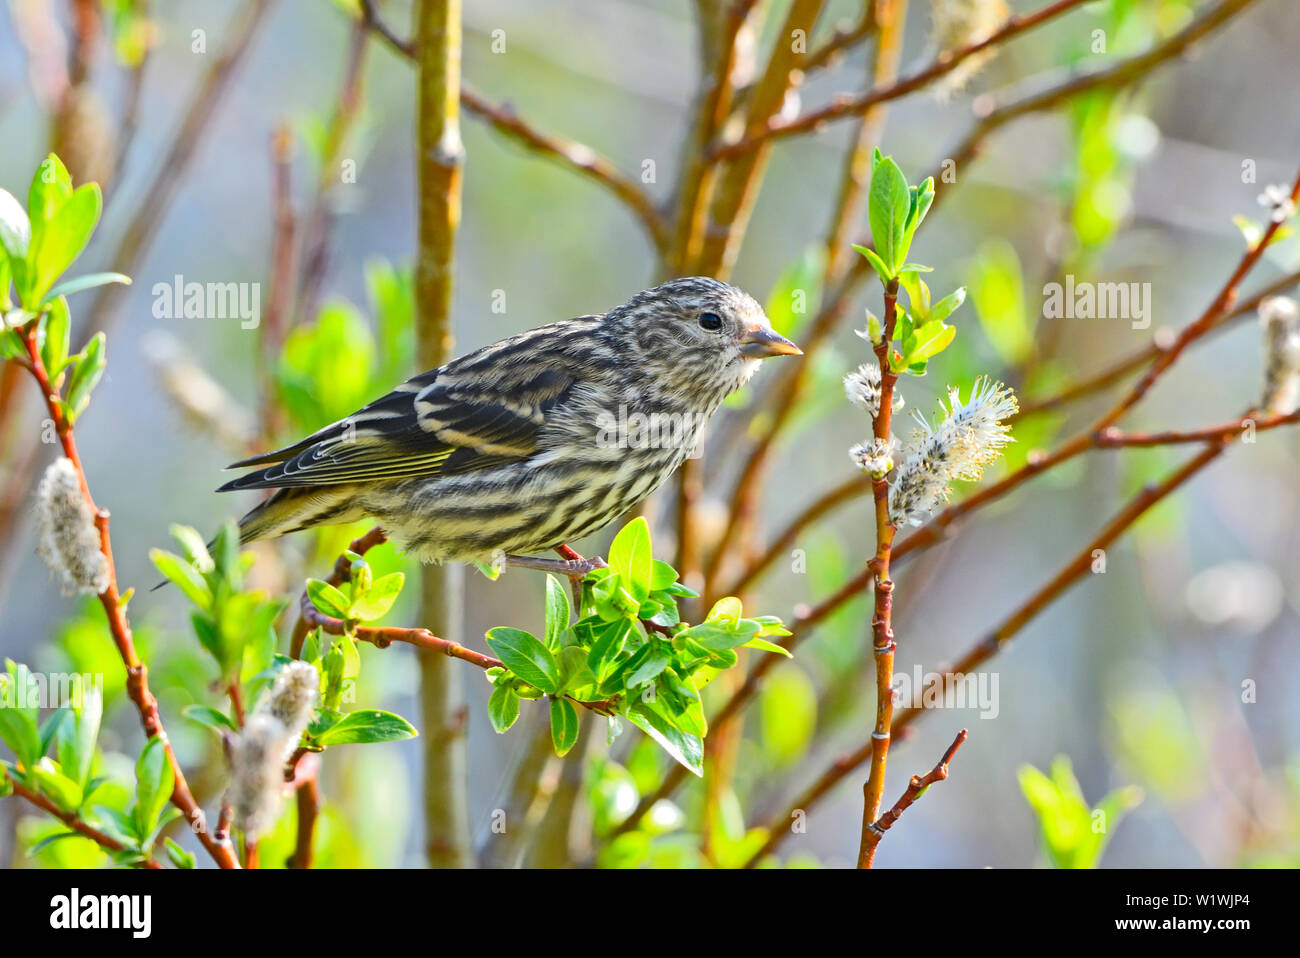 A side view of a Pine Siskin bird 'Carduelis pinus',  perched on a willow tree branch a forested area in rural Alberta Canada Stock Photo